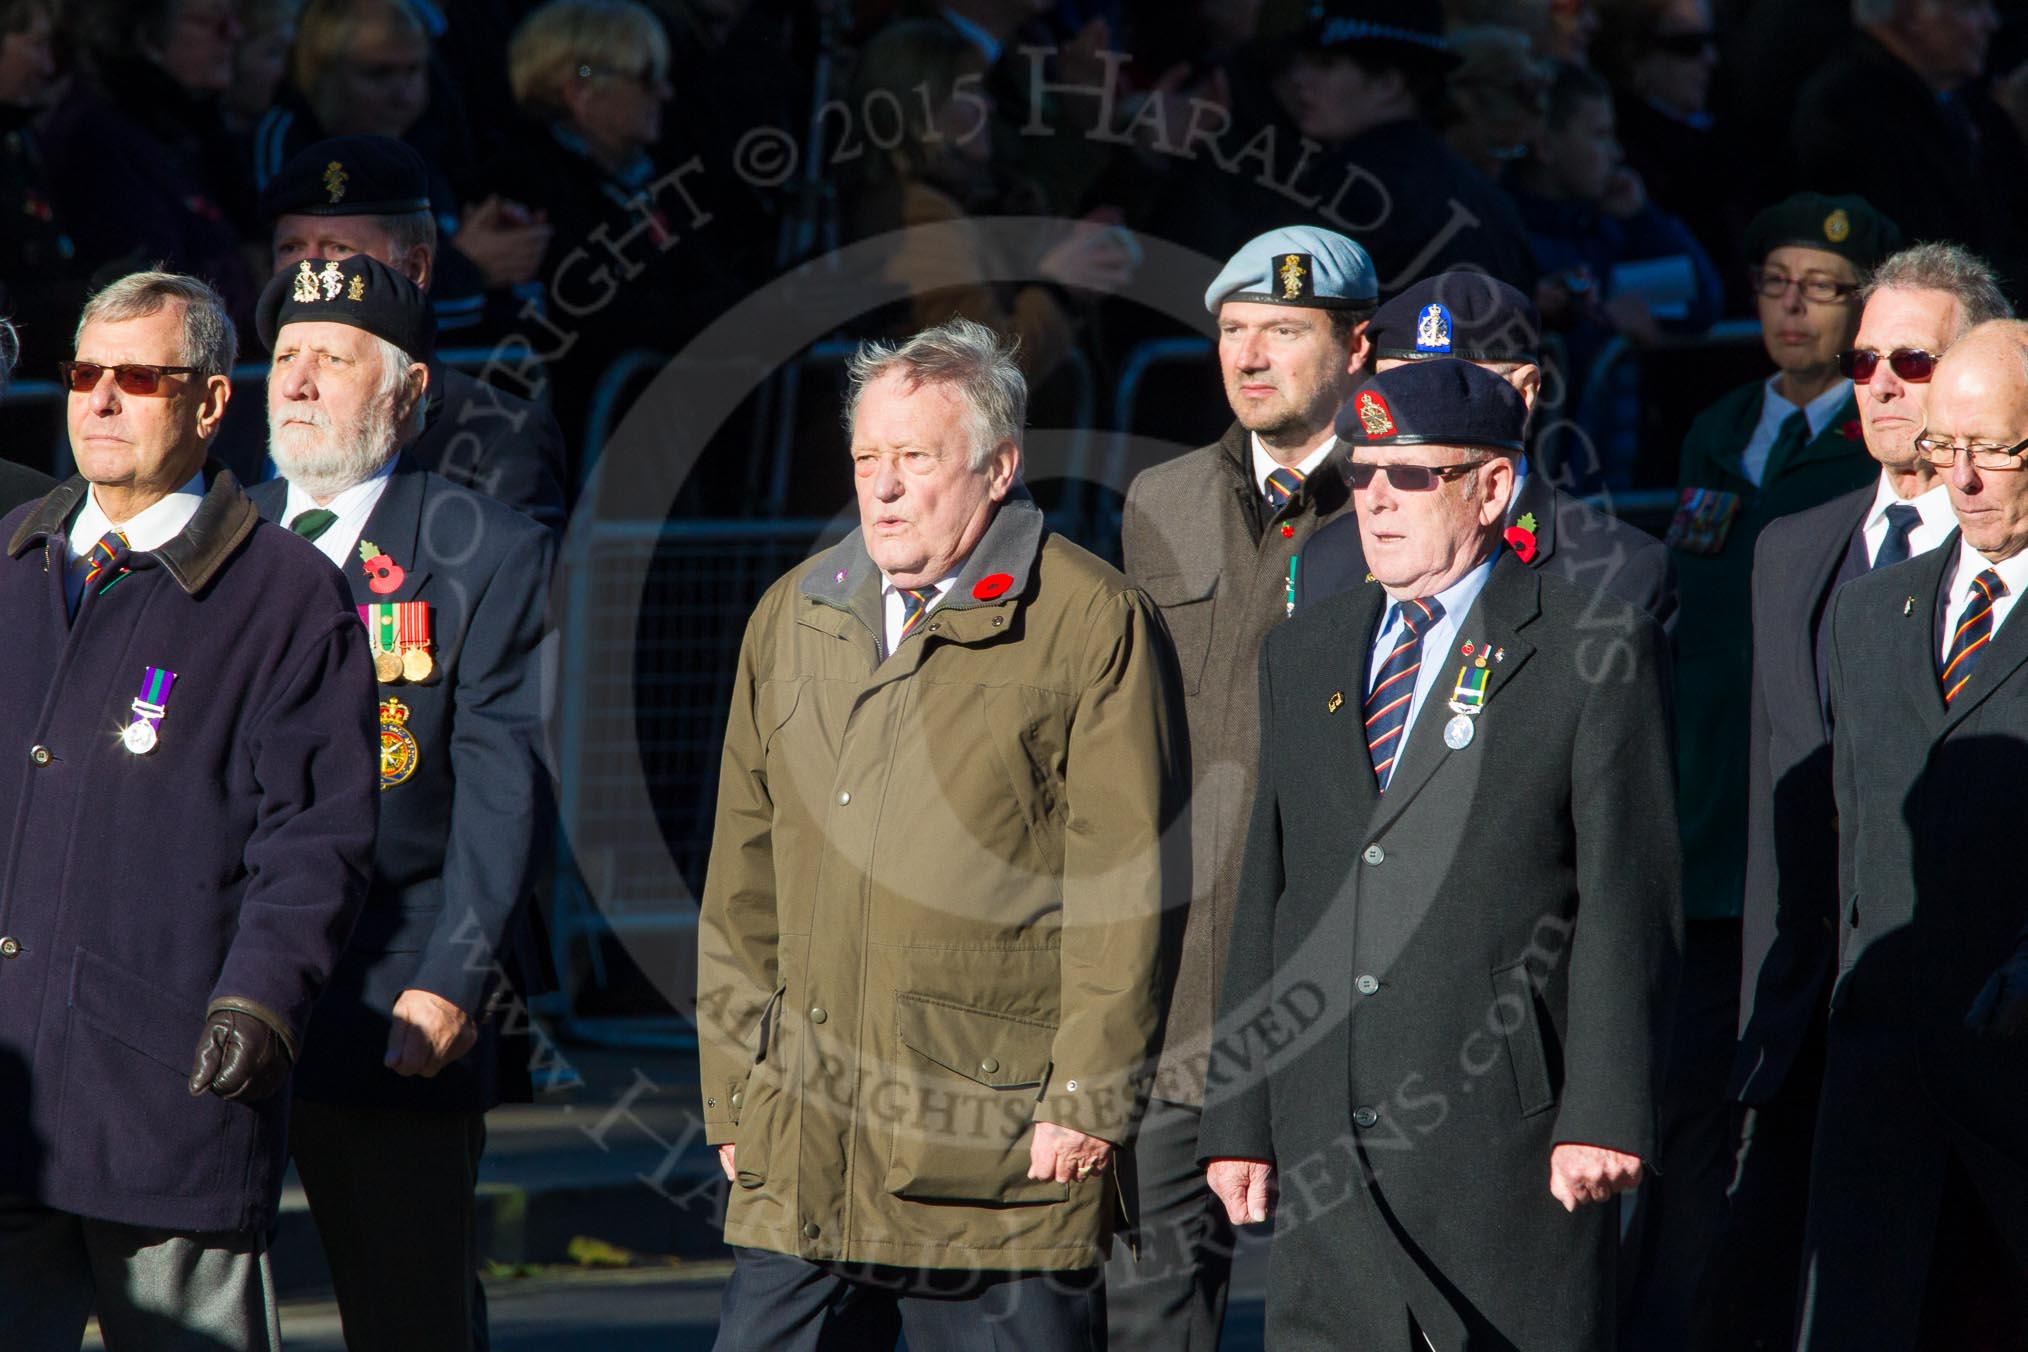 Remembrance Sunday Cenotaph March Past 2013: B14 - Arborfield Old Boys Association..
Press stand opposite the Foreign Office building, Whitehall, London SW1,
London,
Greater London,
United Kingdom,
on 10 November 2013 at 12:01, image #1399